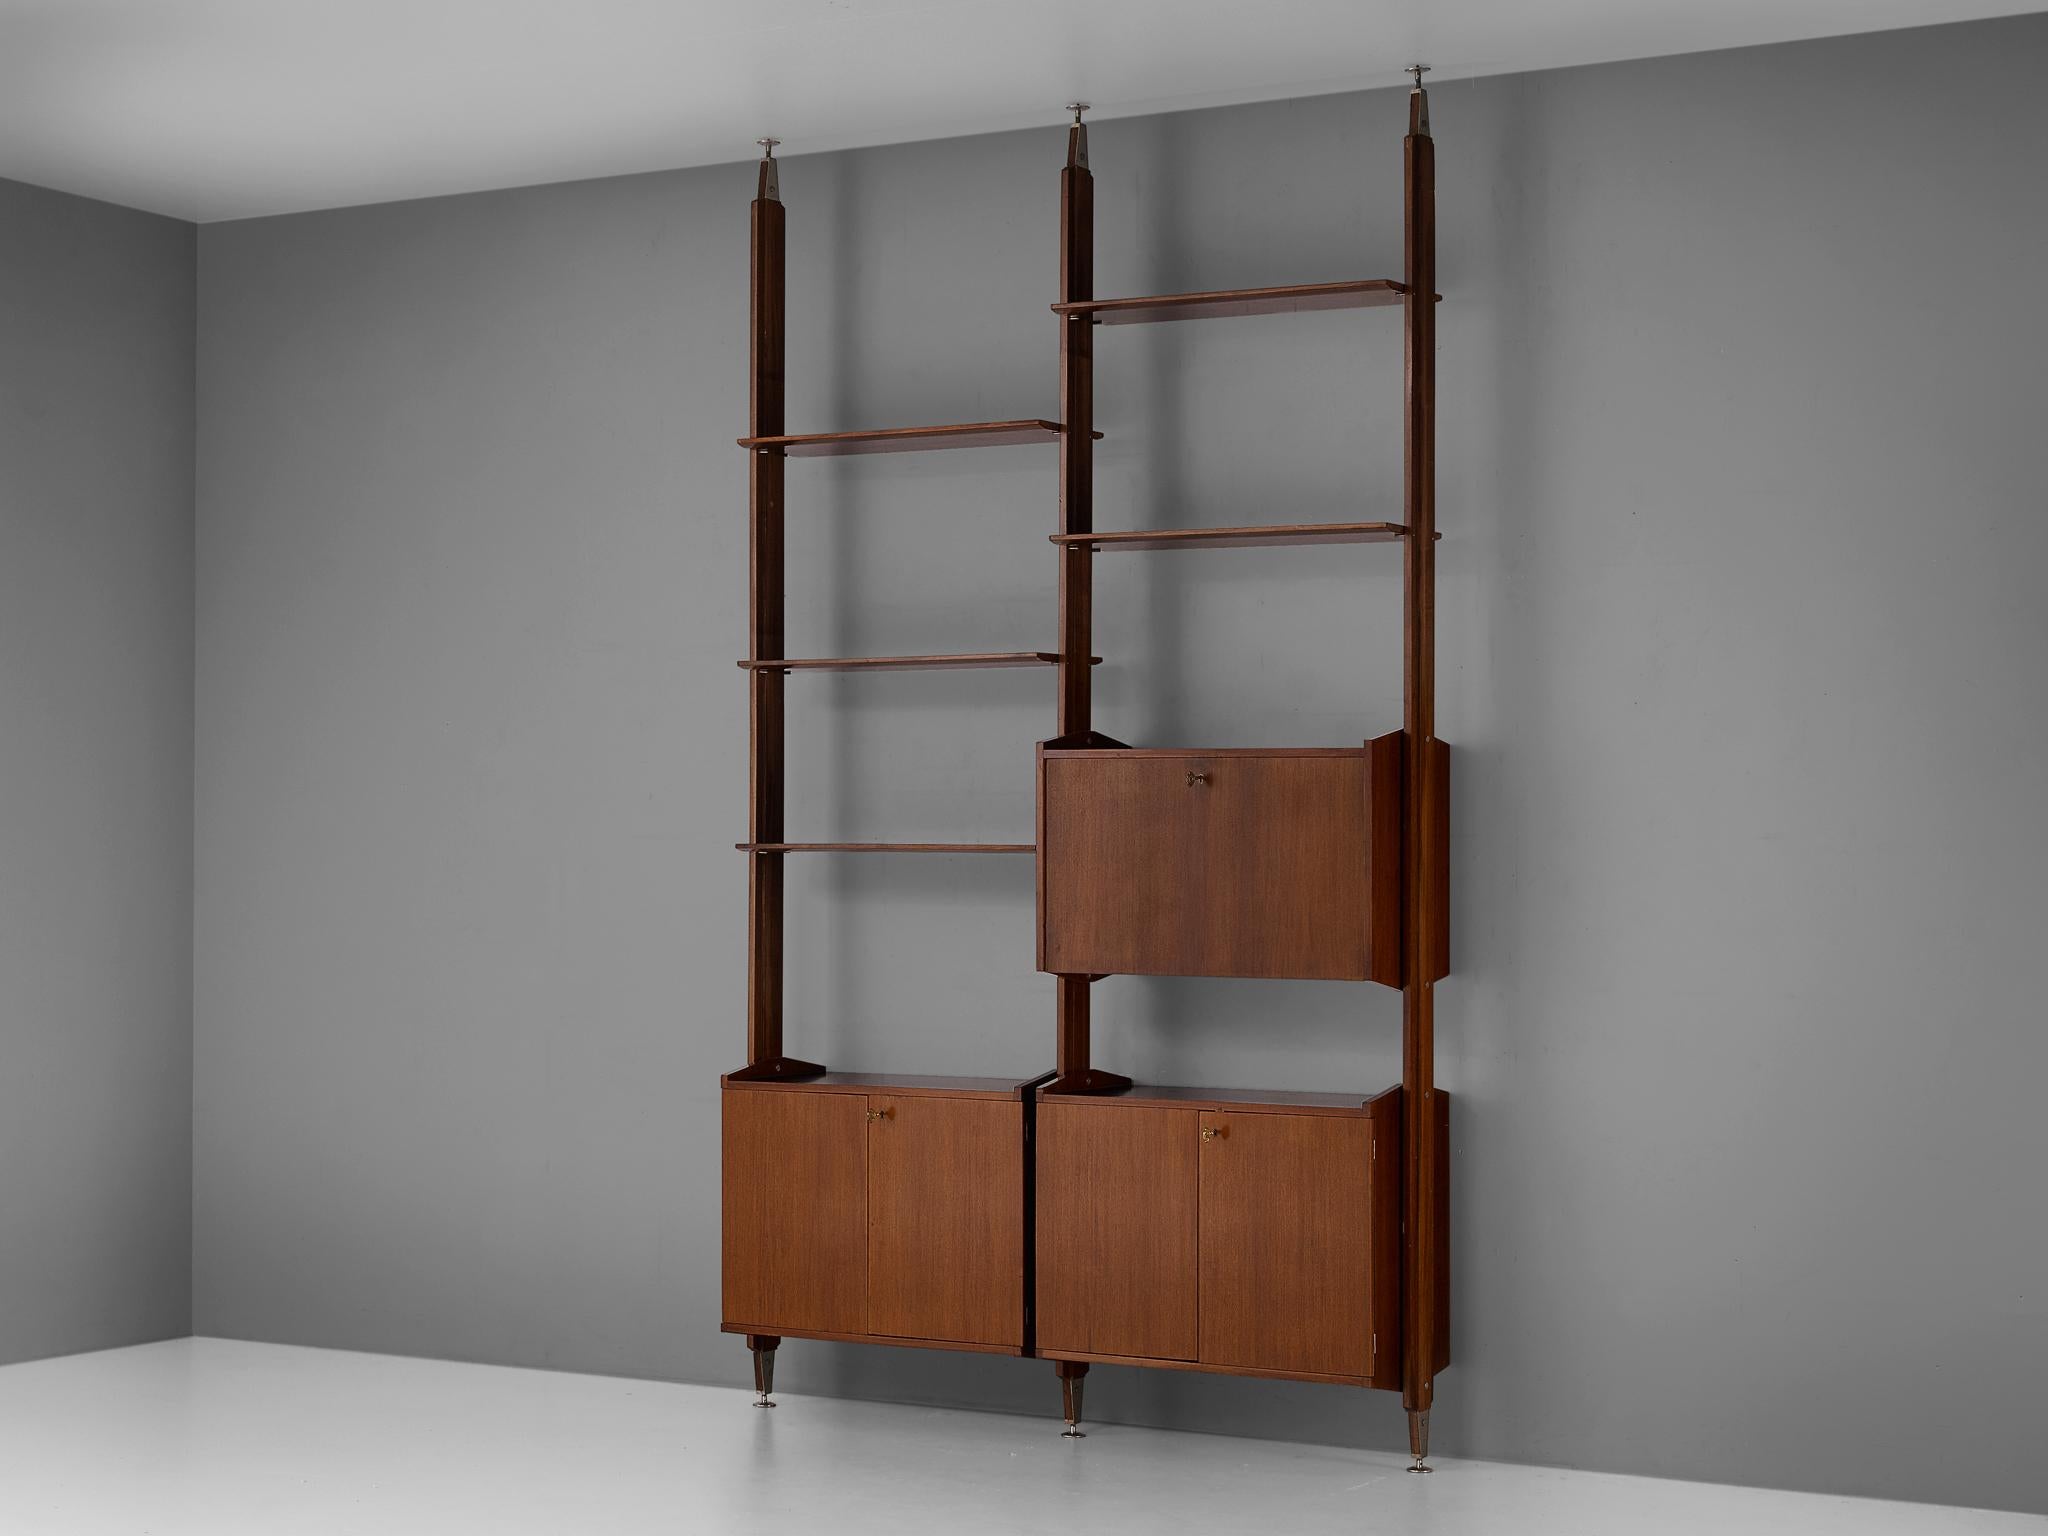 Modular wall unit or room divider, walnut, metal Italy, circa 1960

This versatile Italian wall unit is executed in walnut and can be used as a bookcase, room divider and cabinet all at once. The exact height is adjustable because of the metal legs